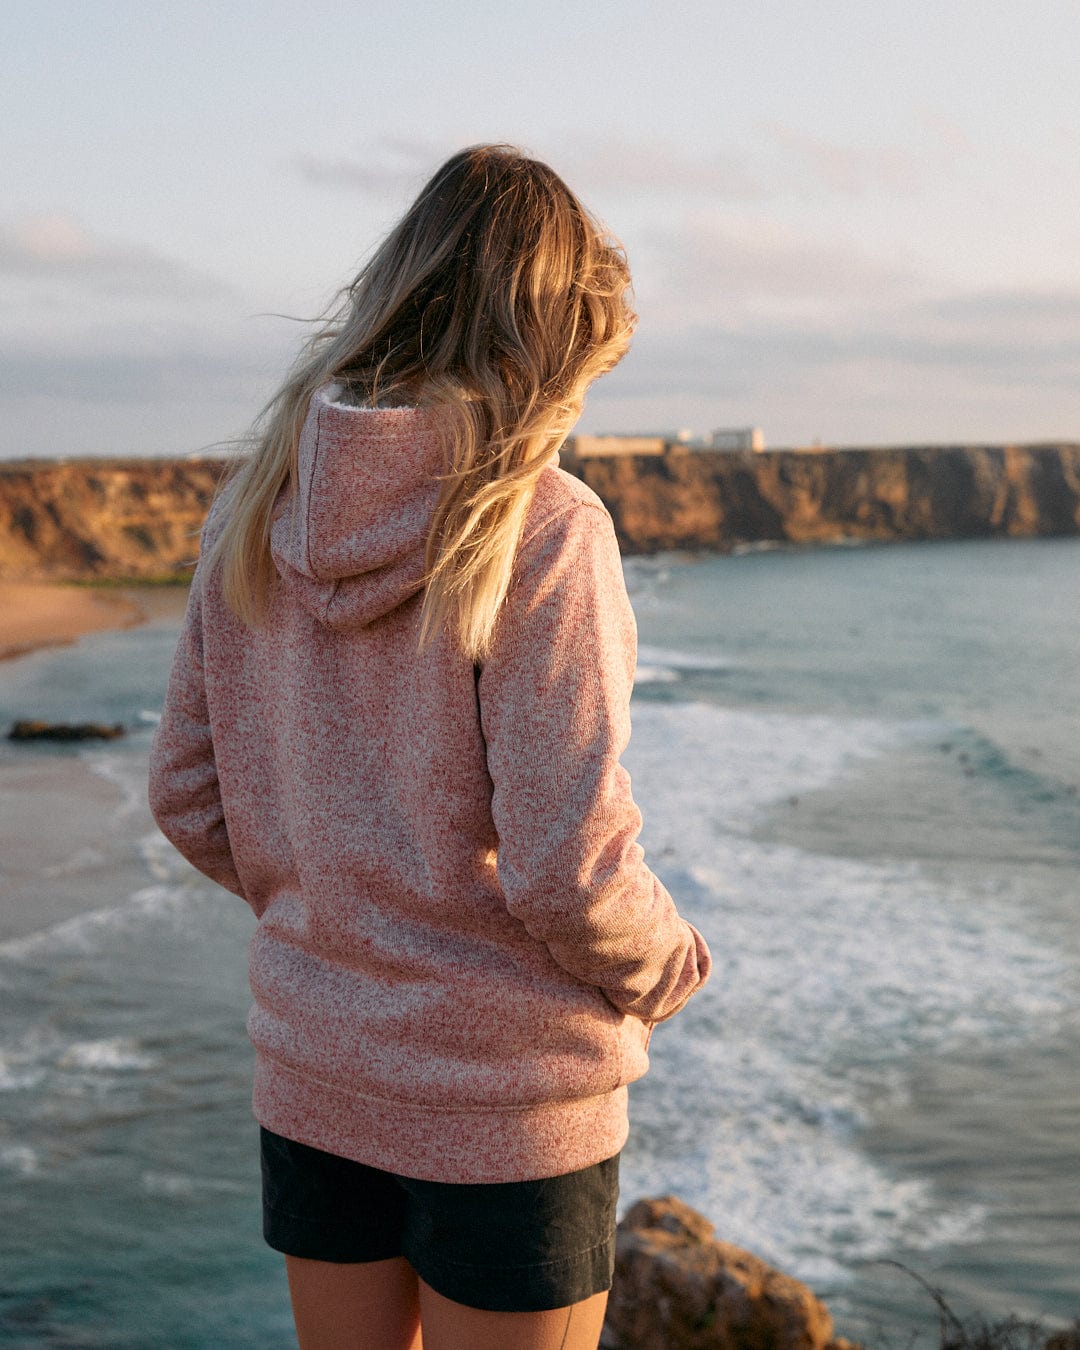 A woman in a Farley - Womens Borg Lined Hoodie in Pink by Saltrock gazes at the ocean.